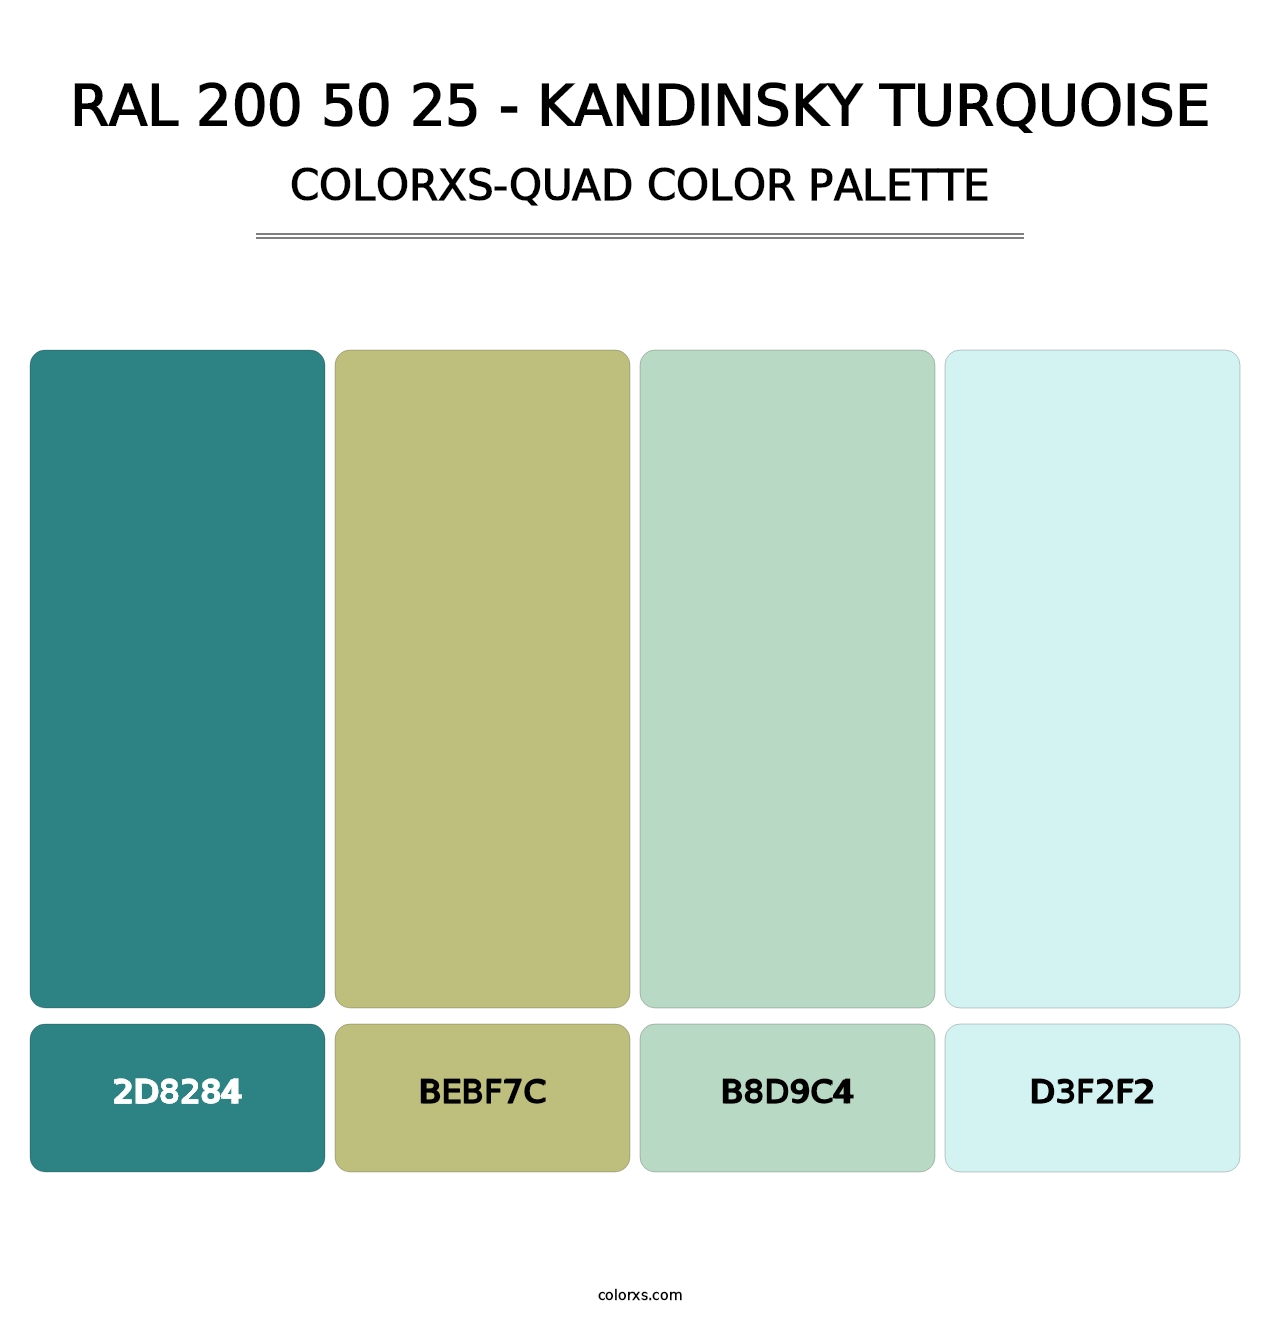 RAL 200 50 25 - Kandinsky Turquoise - Colorxs Quad Palette